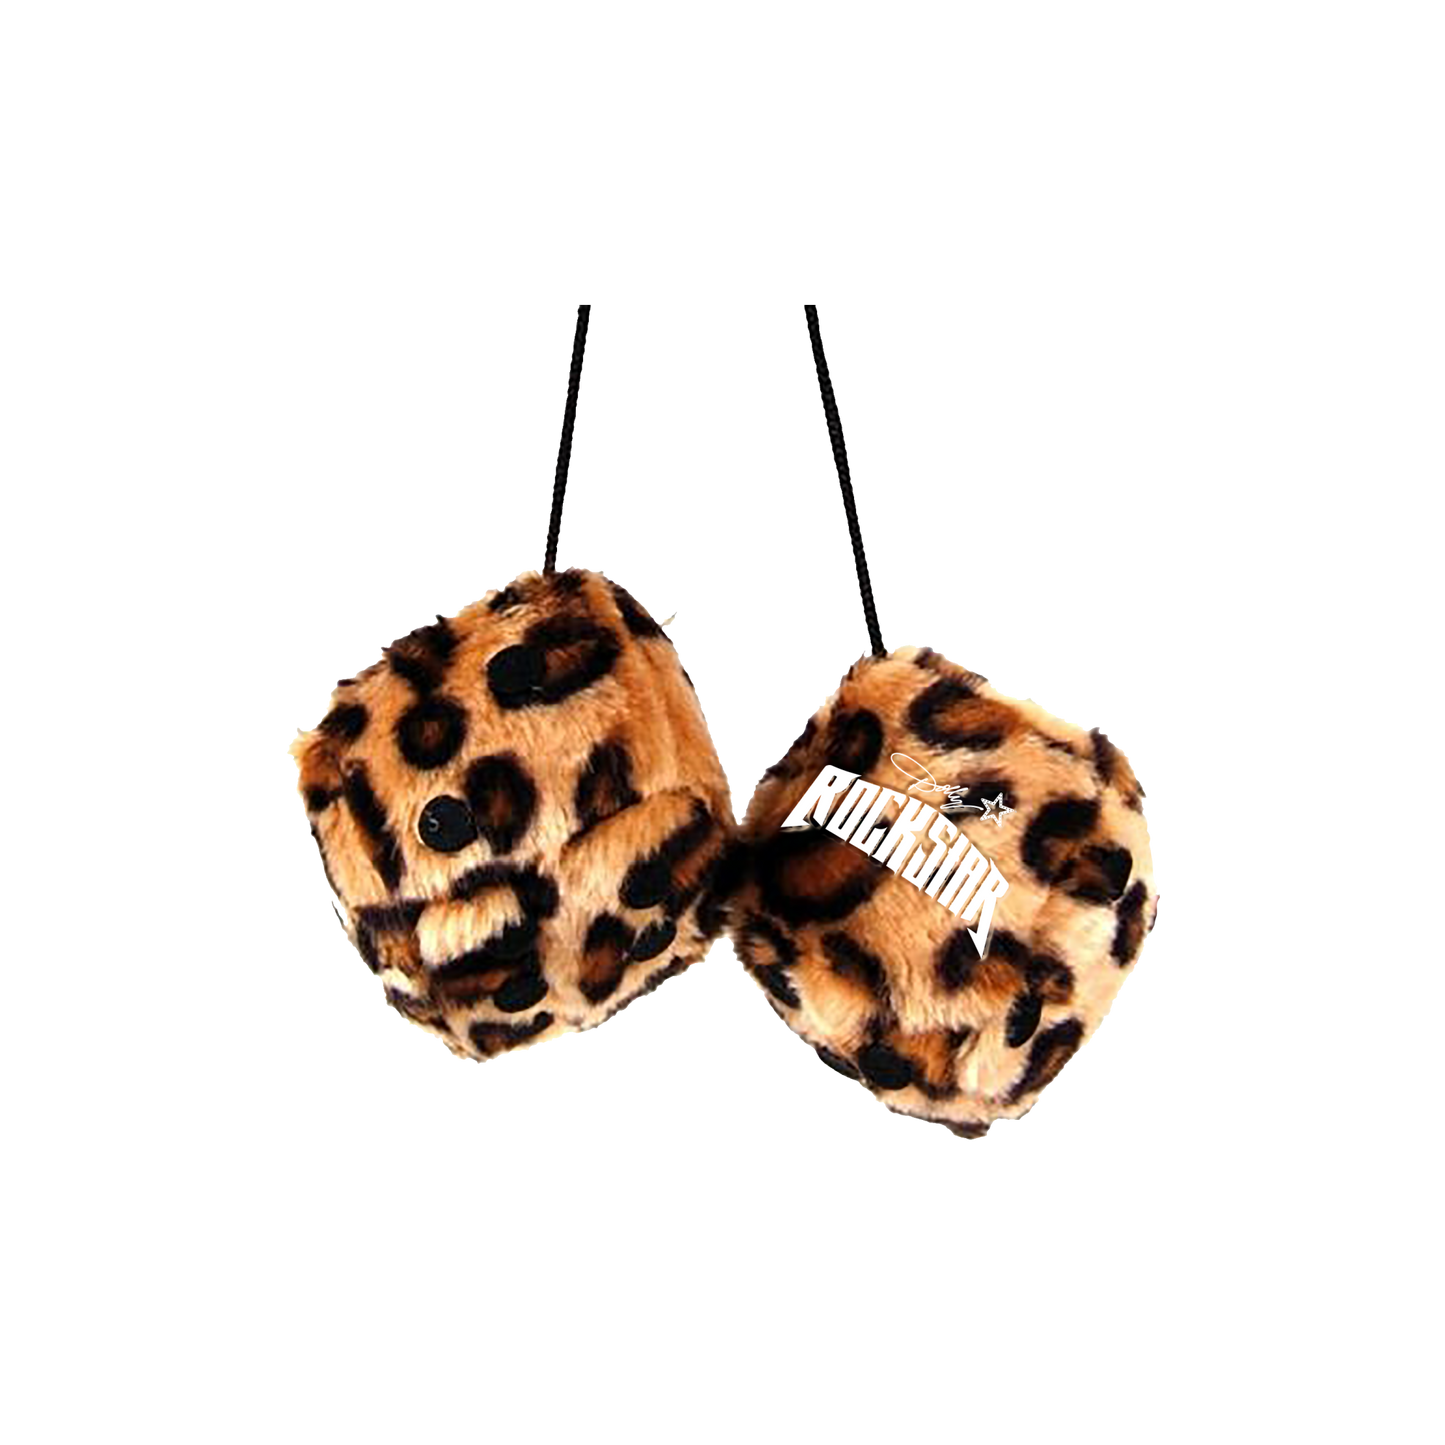 Official Dolly Parton Merchandise. Custom fuzzy leopard print dice embroidered with the Dolly Parton Rockstar logo. Hang 'em in your sweet ride.